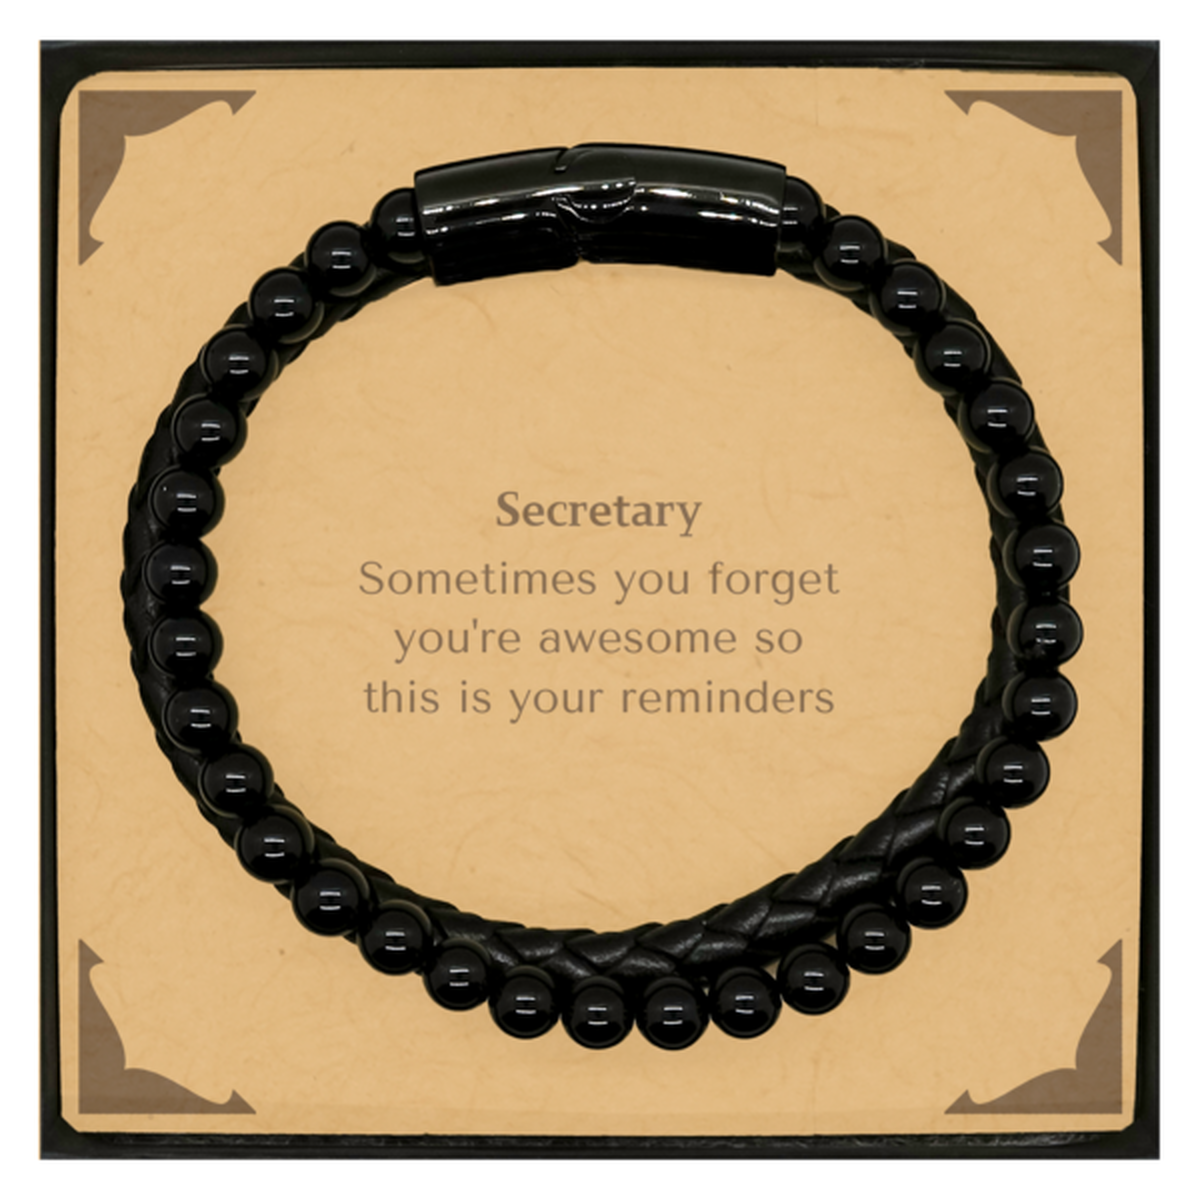 Sentimental Secretary Stone Leather Bracelets, Secretary Sometimes you forget you're awesome so this is your reminders, Graduation Christmas Birthday Gifts for Secretary, Men, Women, Coworkers